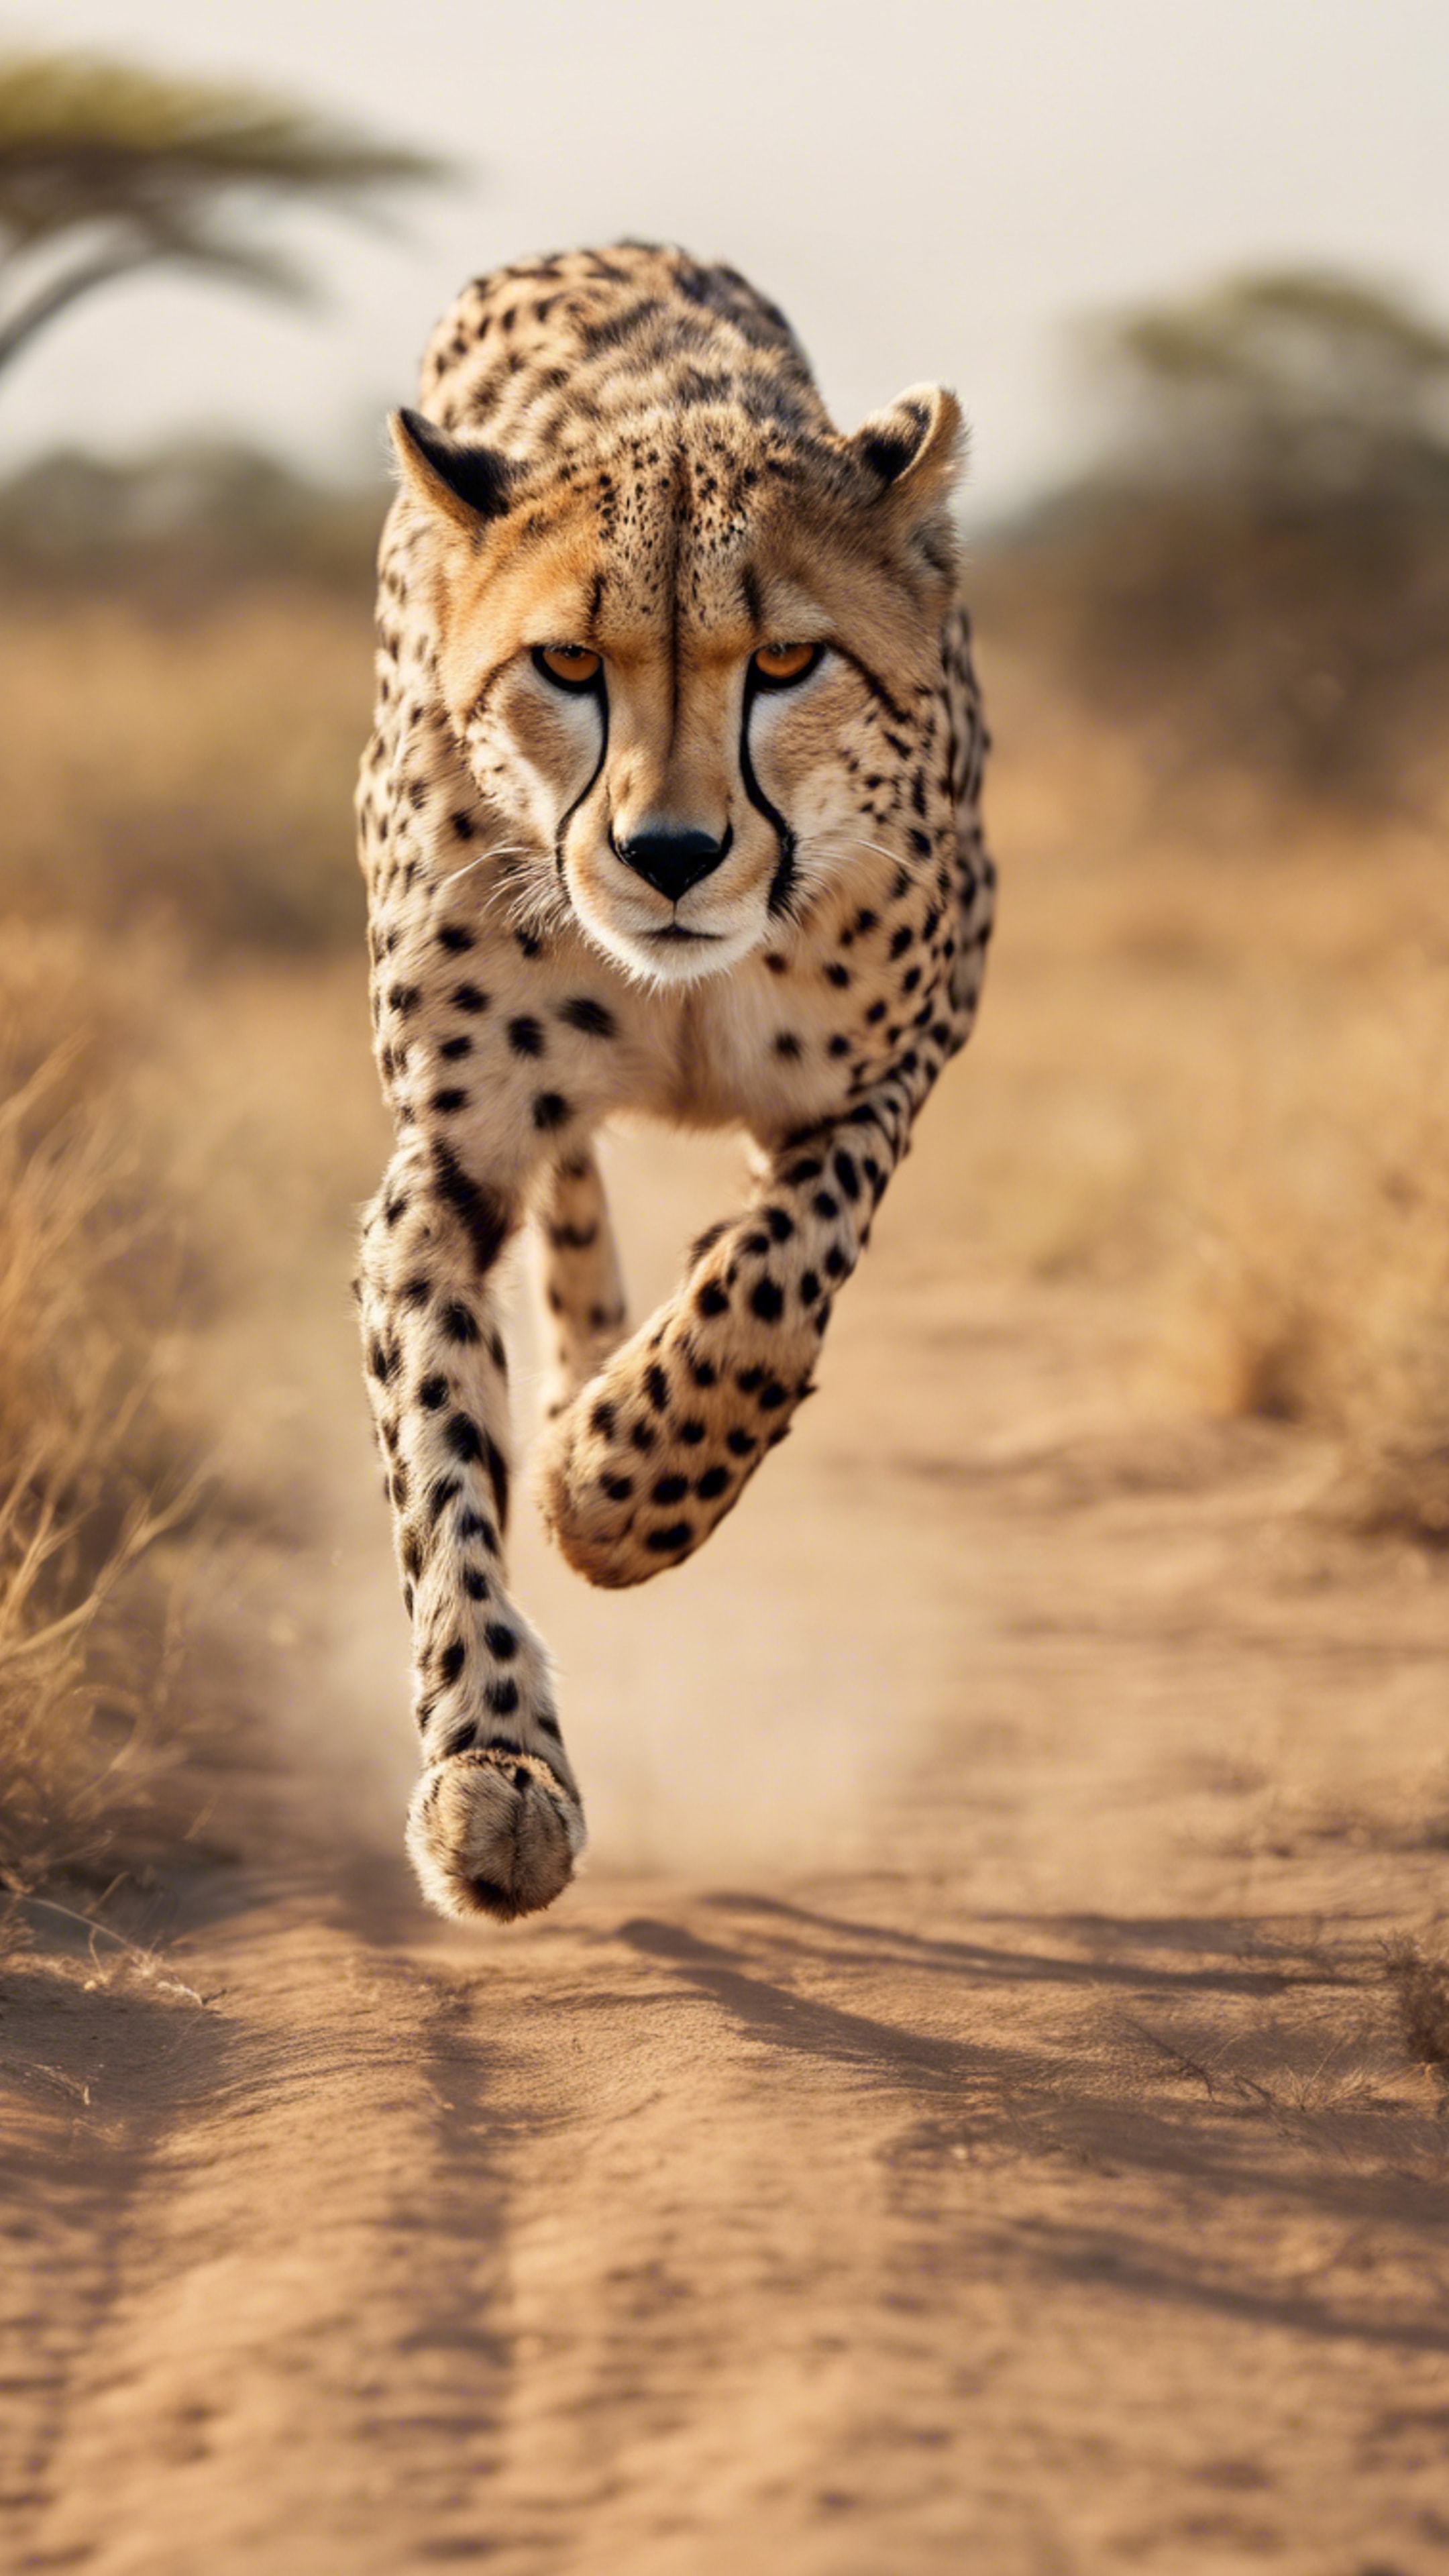 An African landscape with a cheetah sprinting, its distinct print standing out. Wallpaper[0bde3fe539cf4d91aae2]